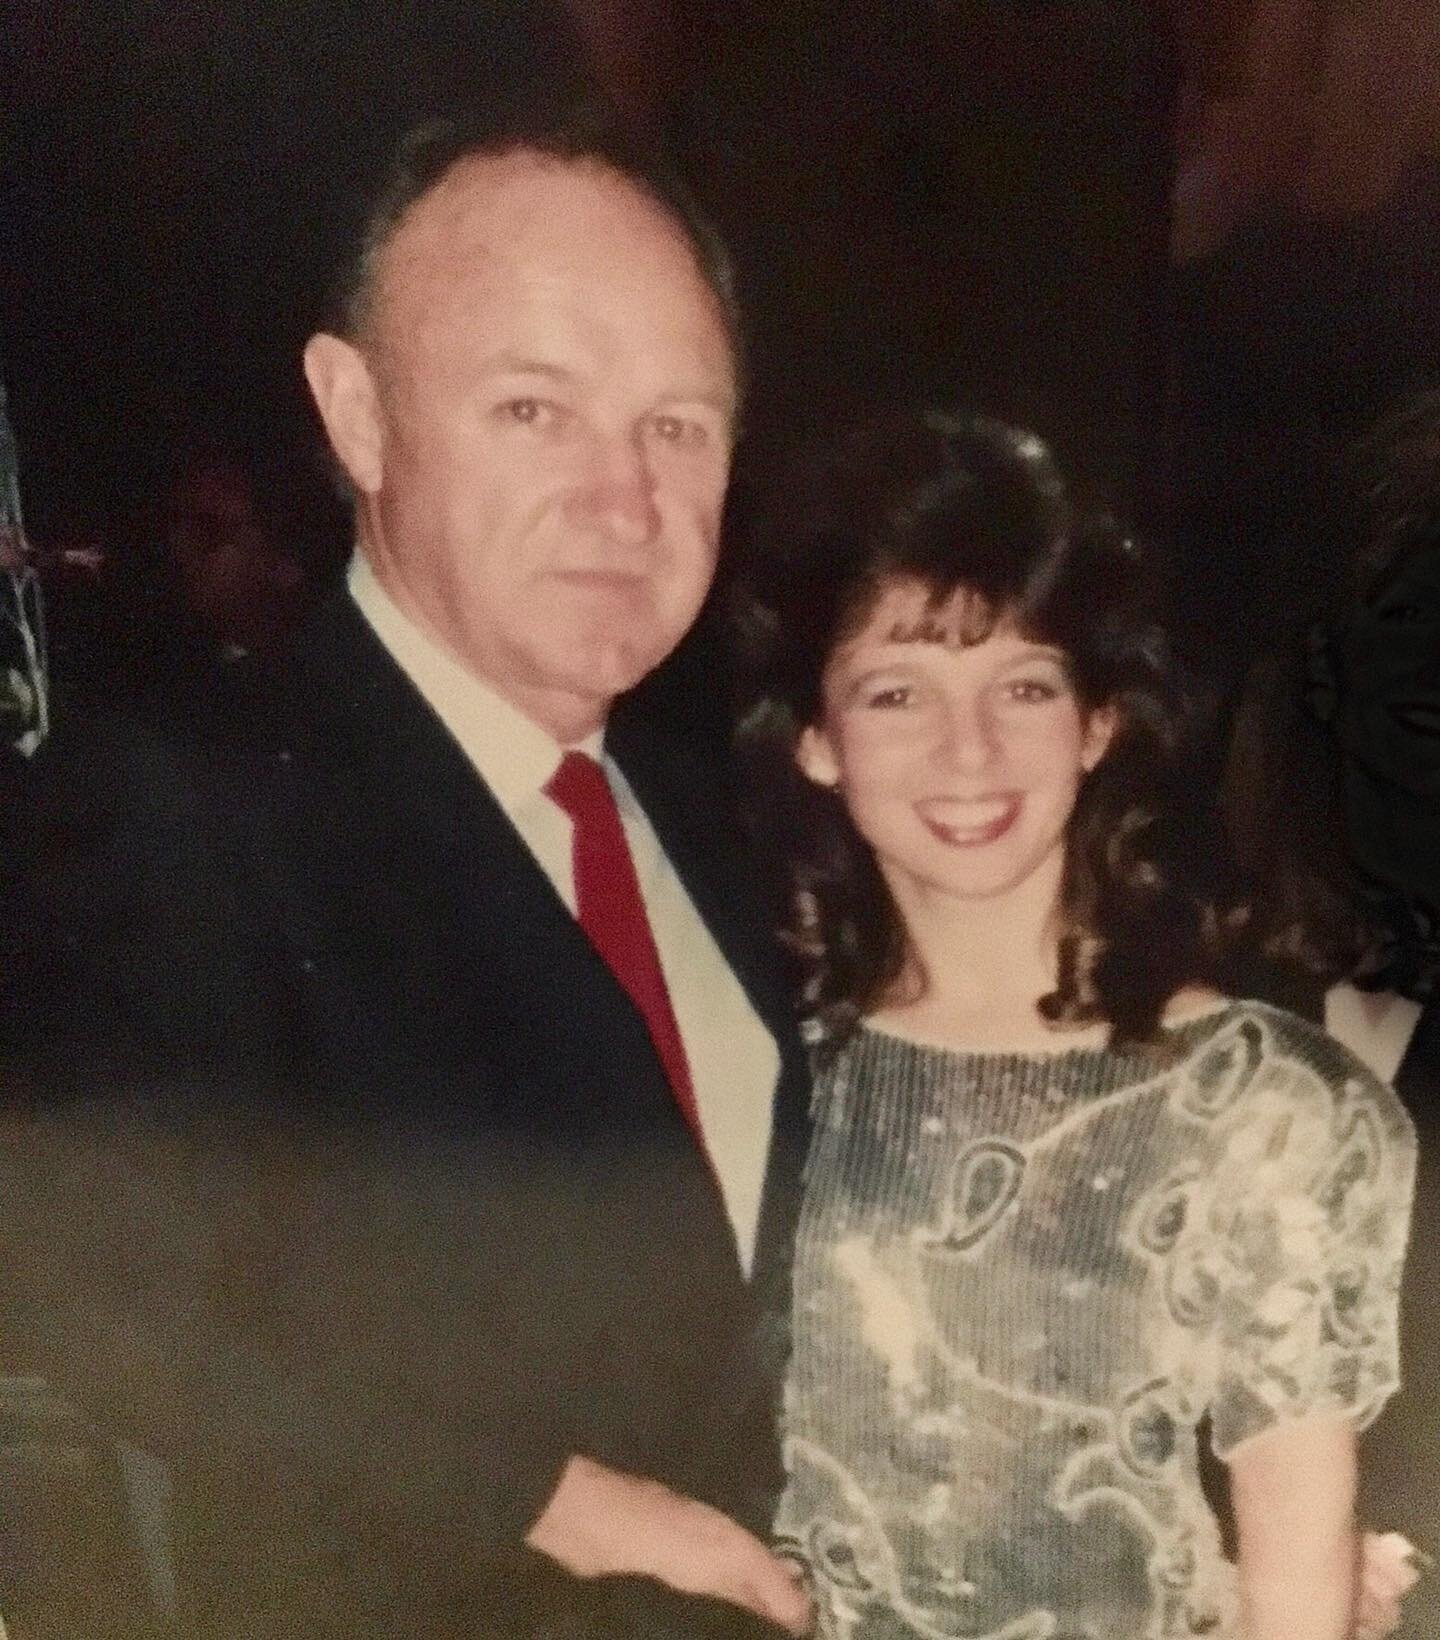 💫🎉Happy Birthday, Gene Hackman!🥂Circa 1988 @ the D.C. world premiere after party of &ldquo;Mississippi Burning&rdquo; circa 1988. I believe he was actually happier than he looks.😄
Nominated for Best Actor in this, he was bested by Michael Douglas